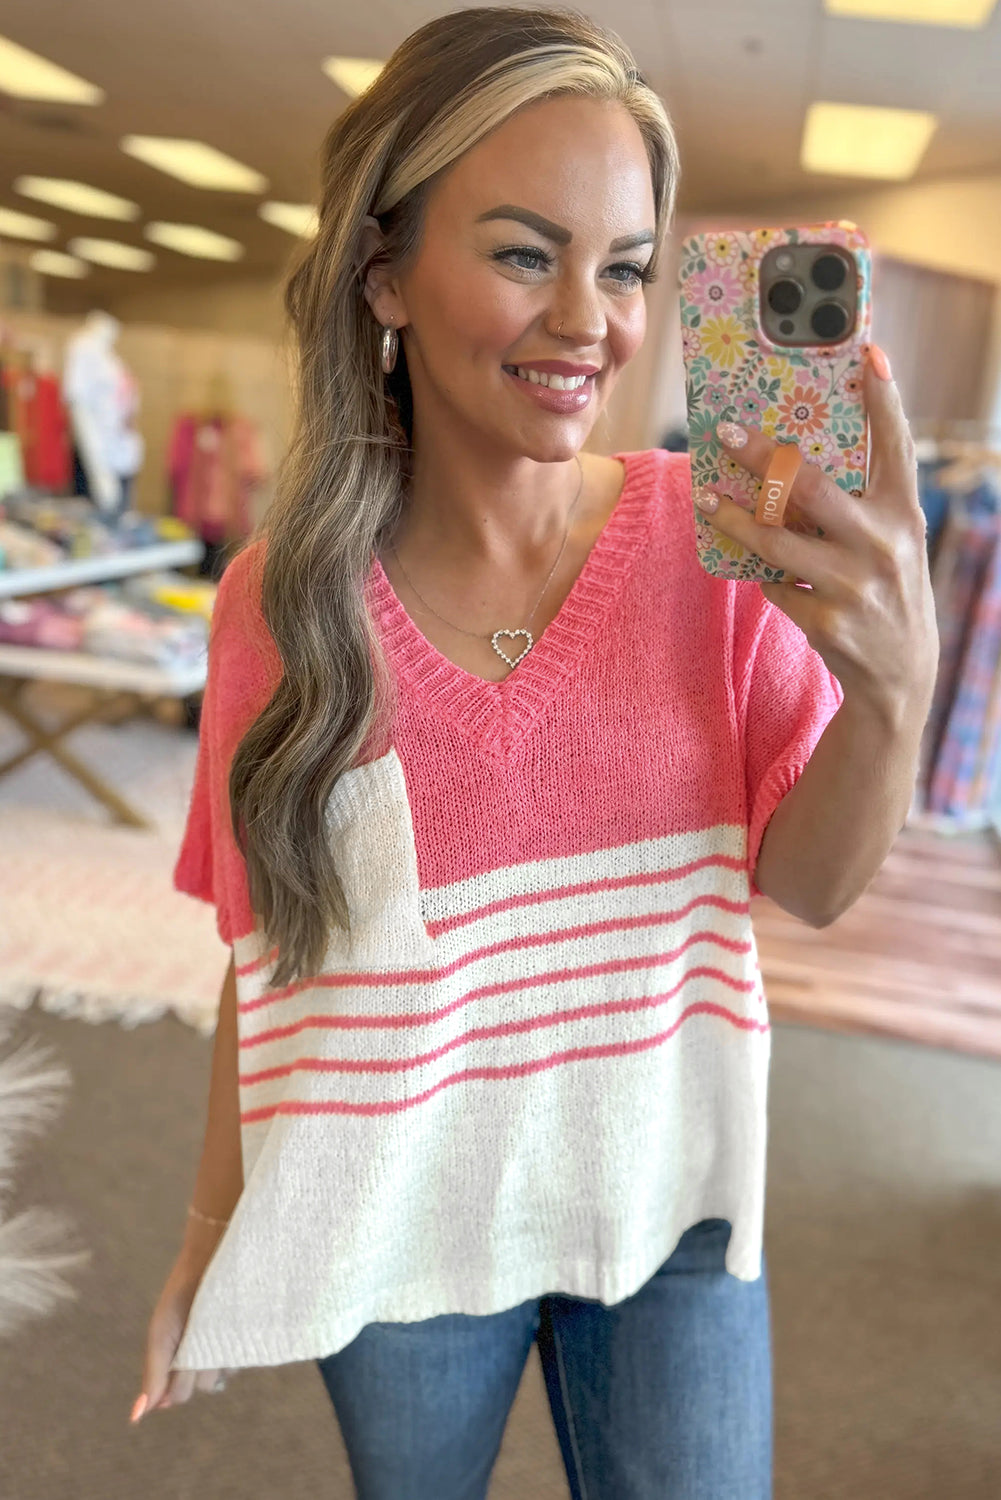 Strawberry Pink Contrast Stripes V Neck Knitted Short Sleeve Top